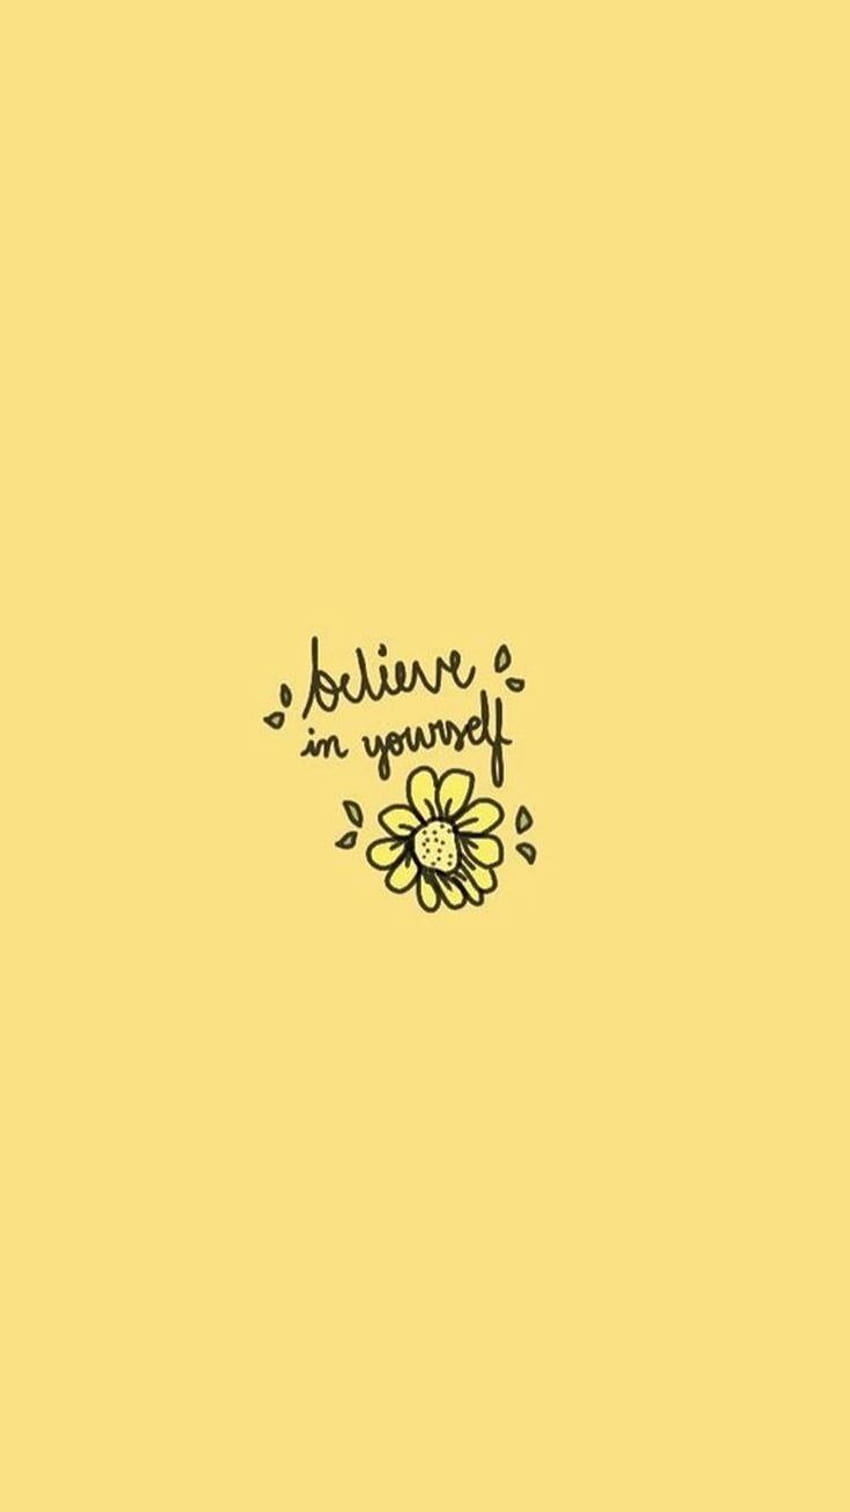 The yellow background with a flower and text - Motivational, inspirational